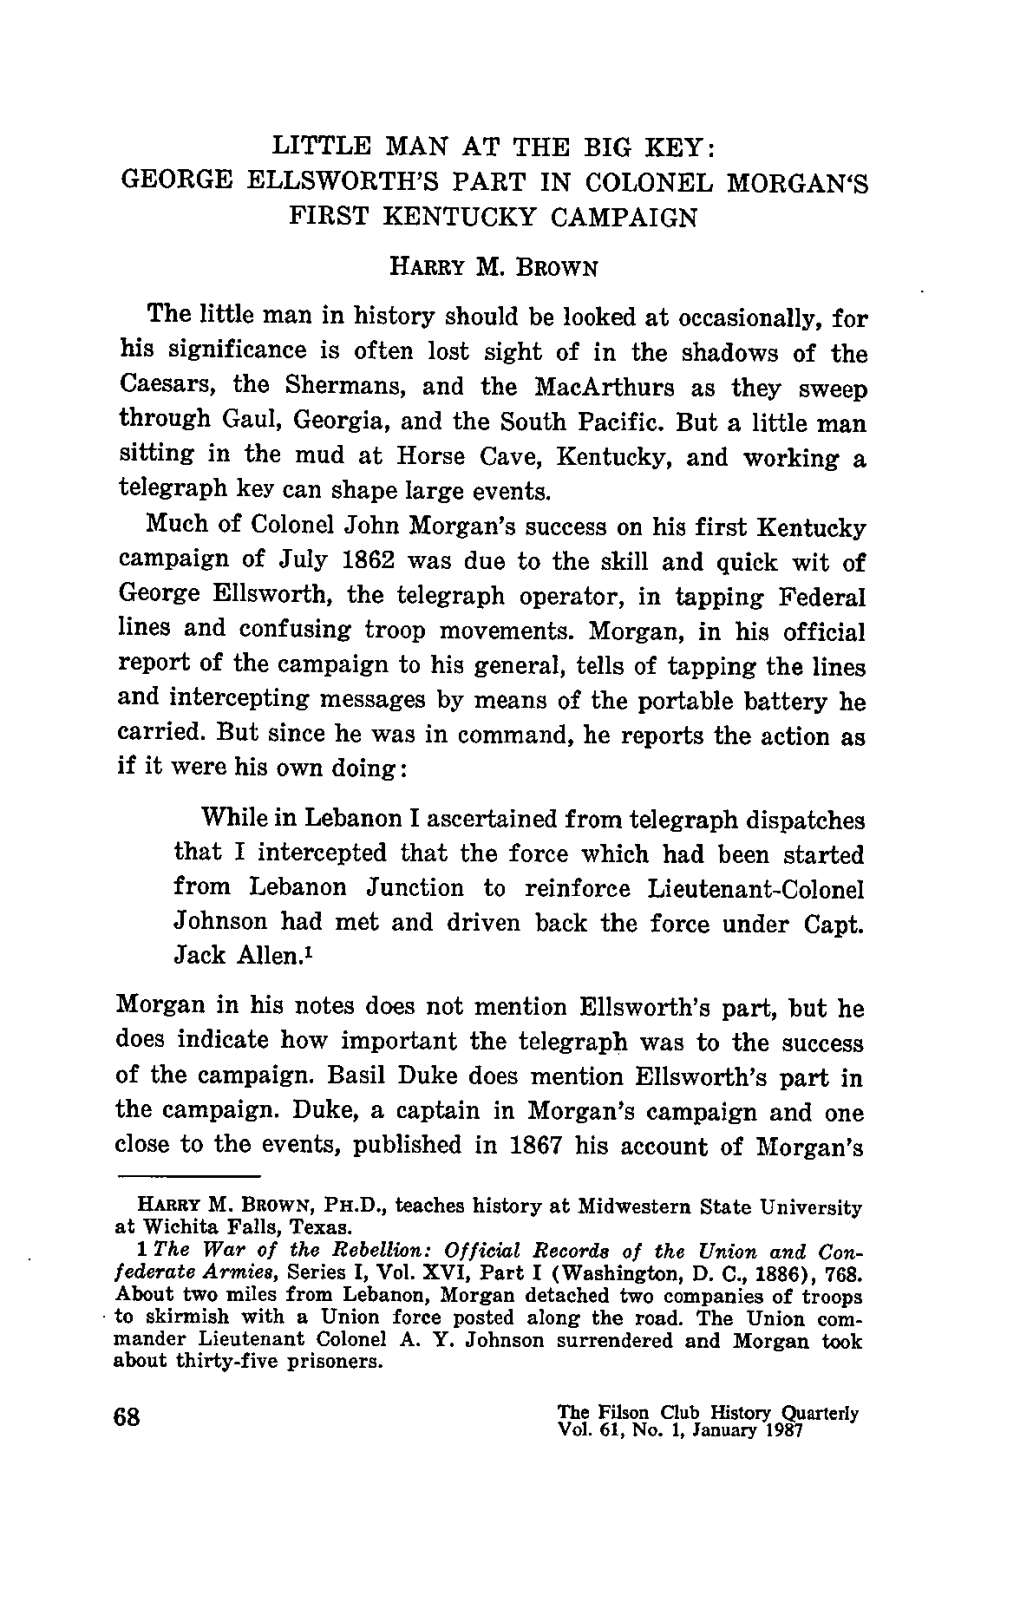 George Ellsworth's Part in Colonel Morgan's First Kentucky Campaign